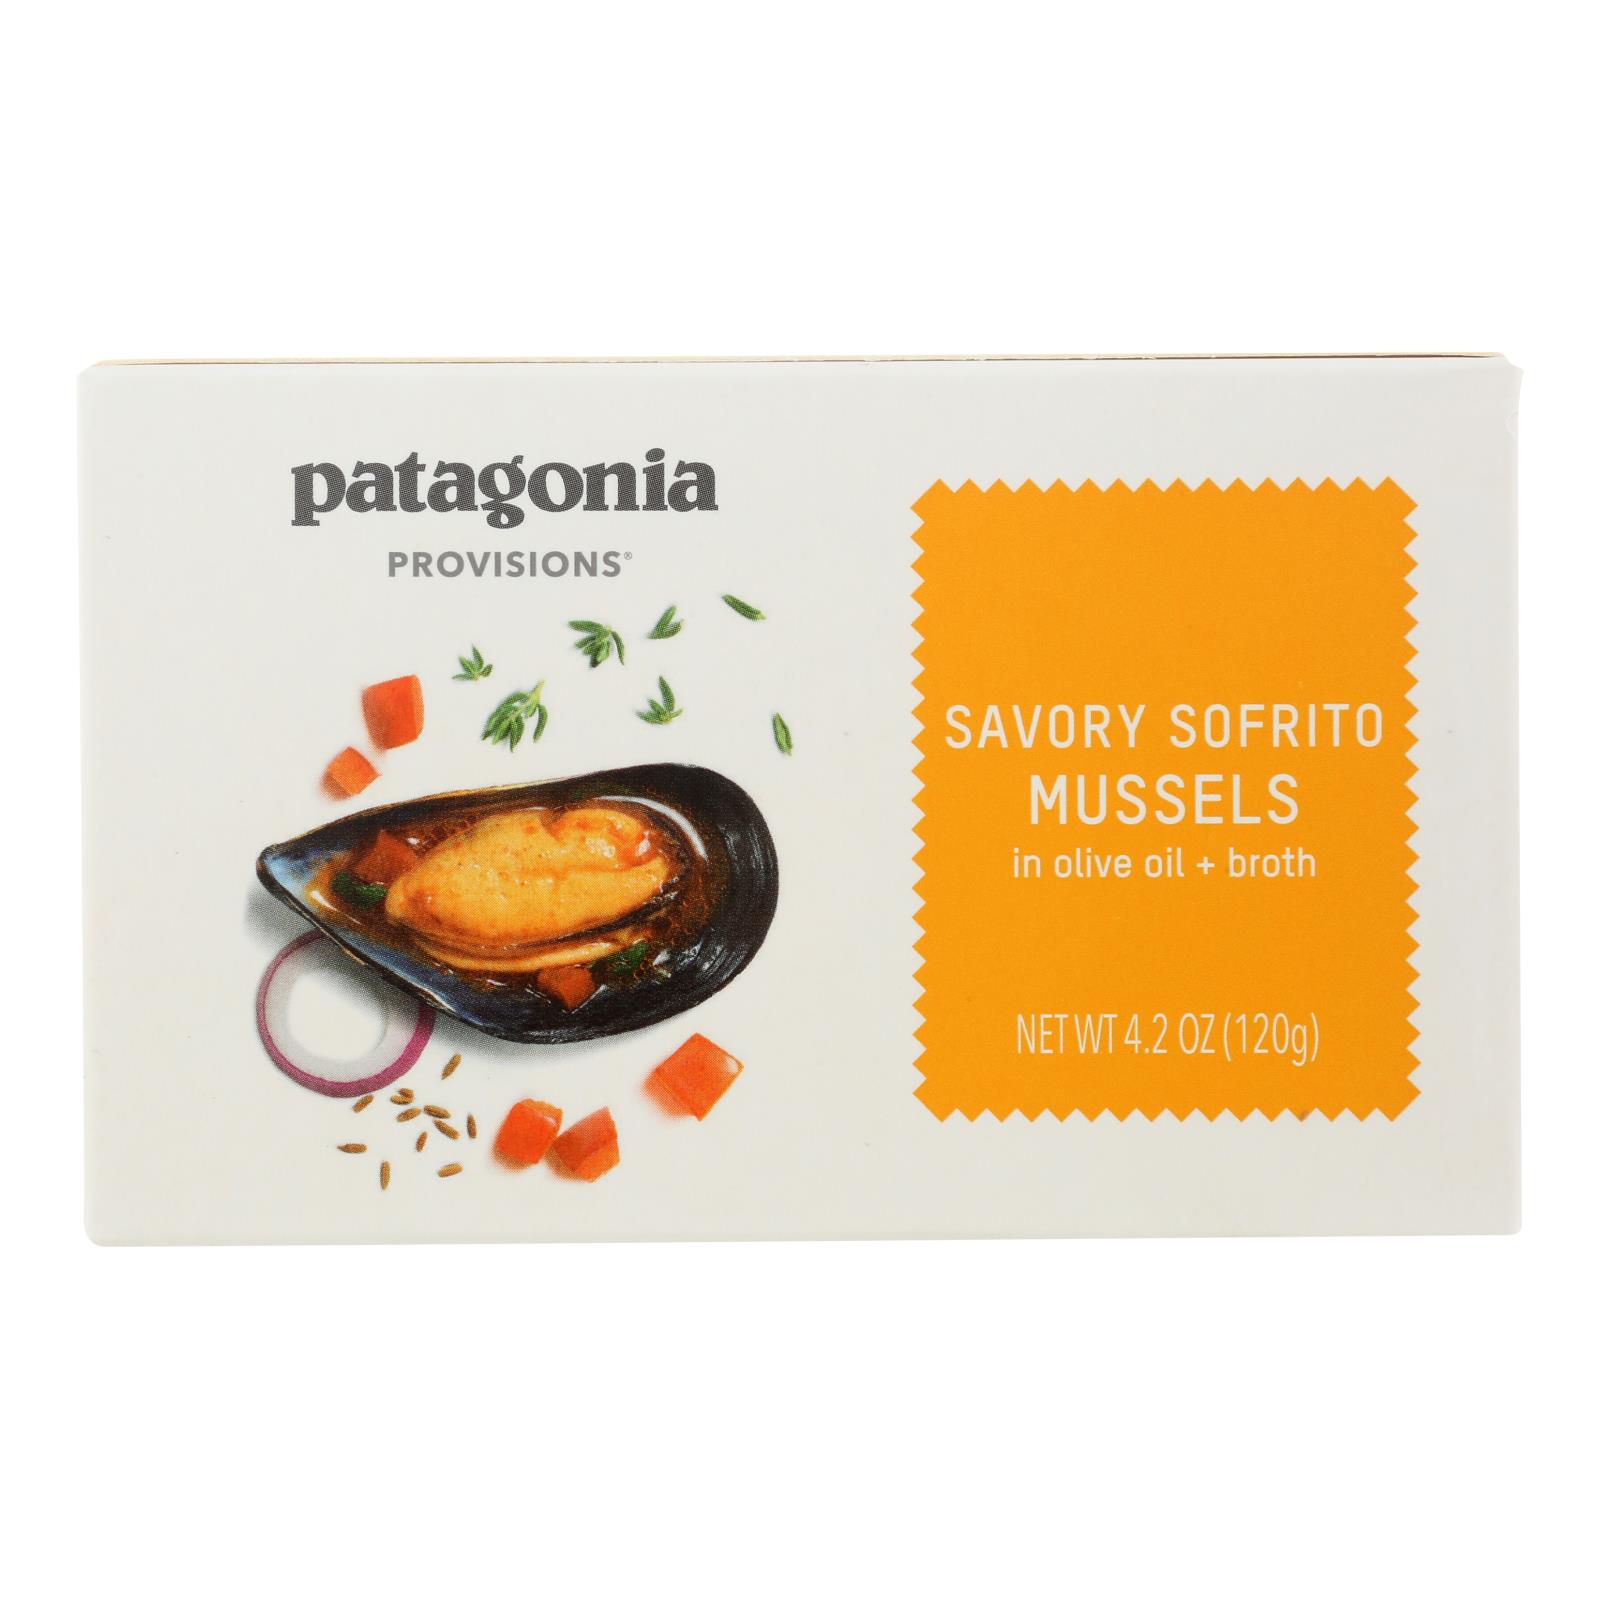 Patagonia - Mussels Savory Sofrito - 10개 묶음상품 - 4.2 OZ